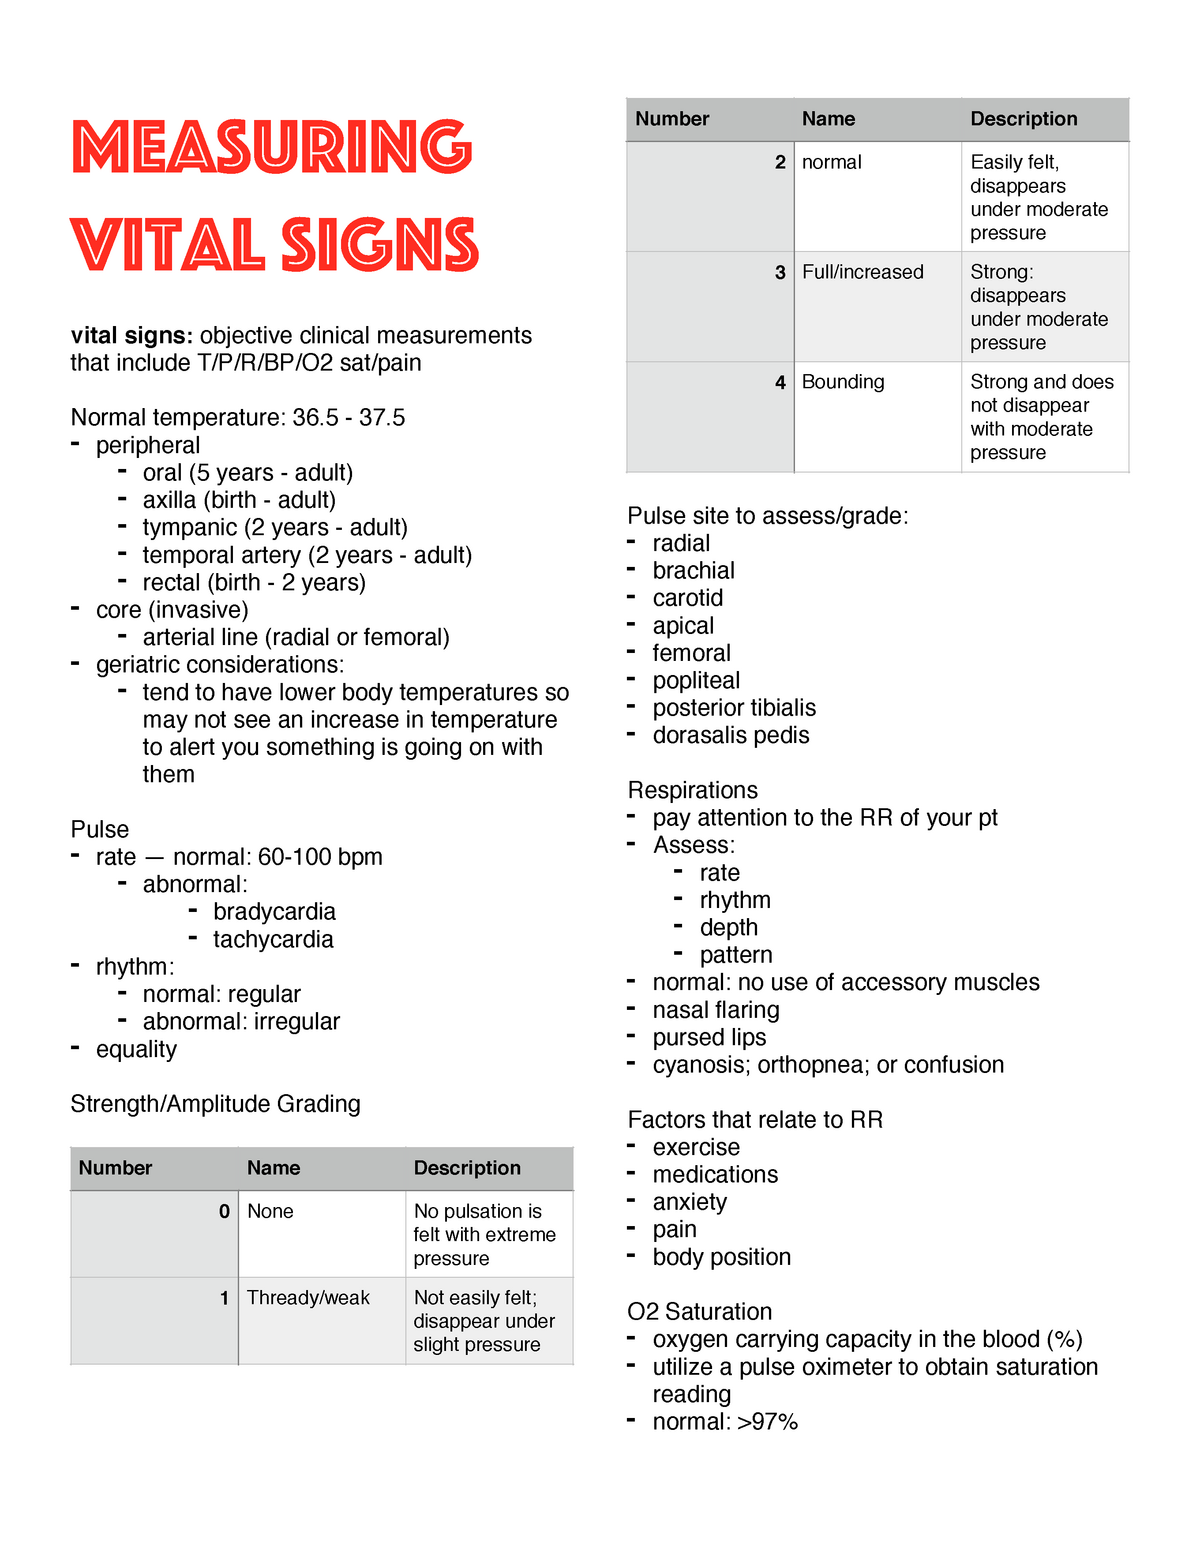 case study for vital signs